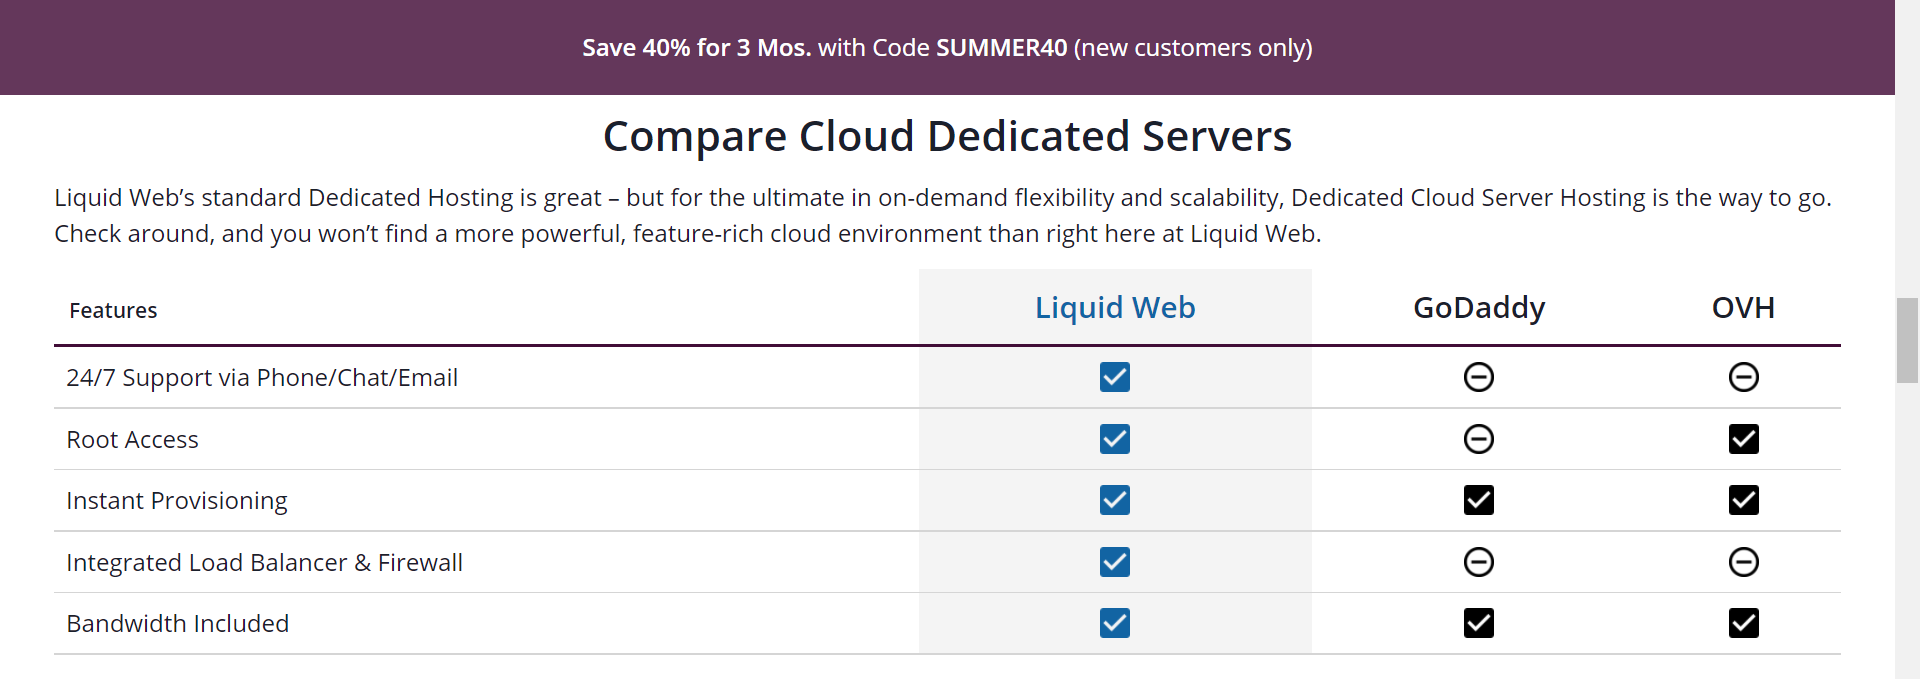 Comparison of Liquid Web features with other hosting providers